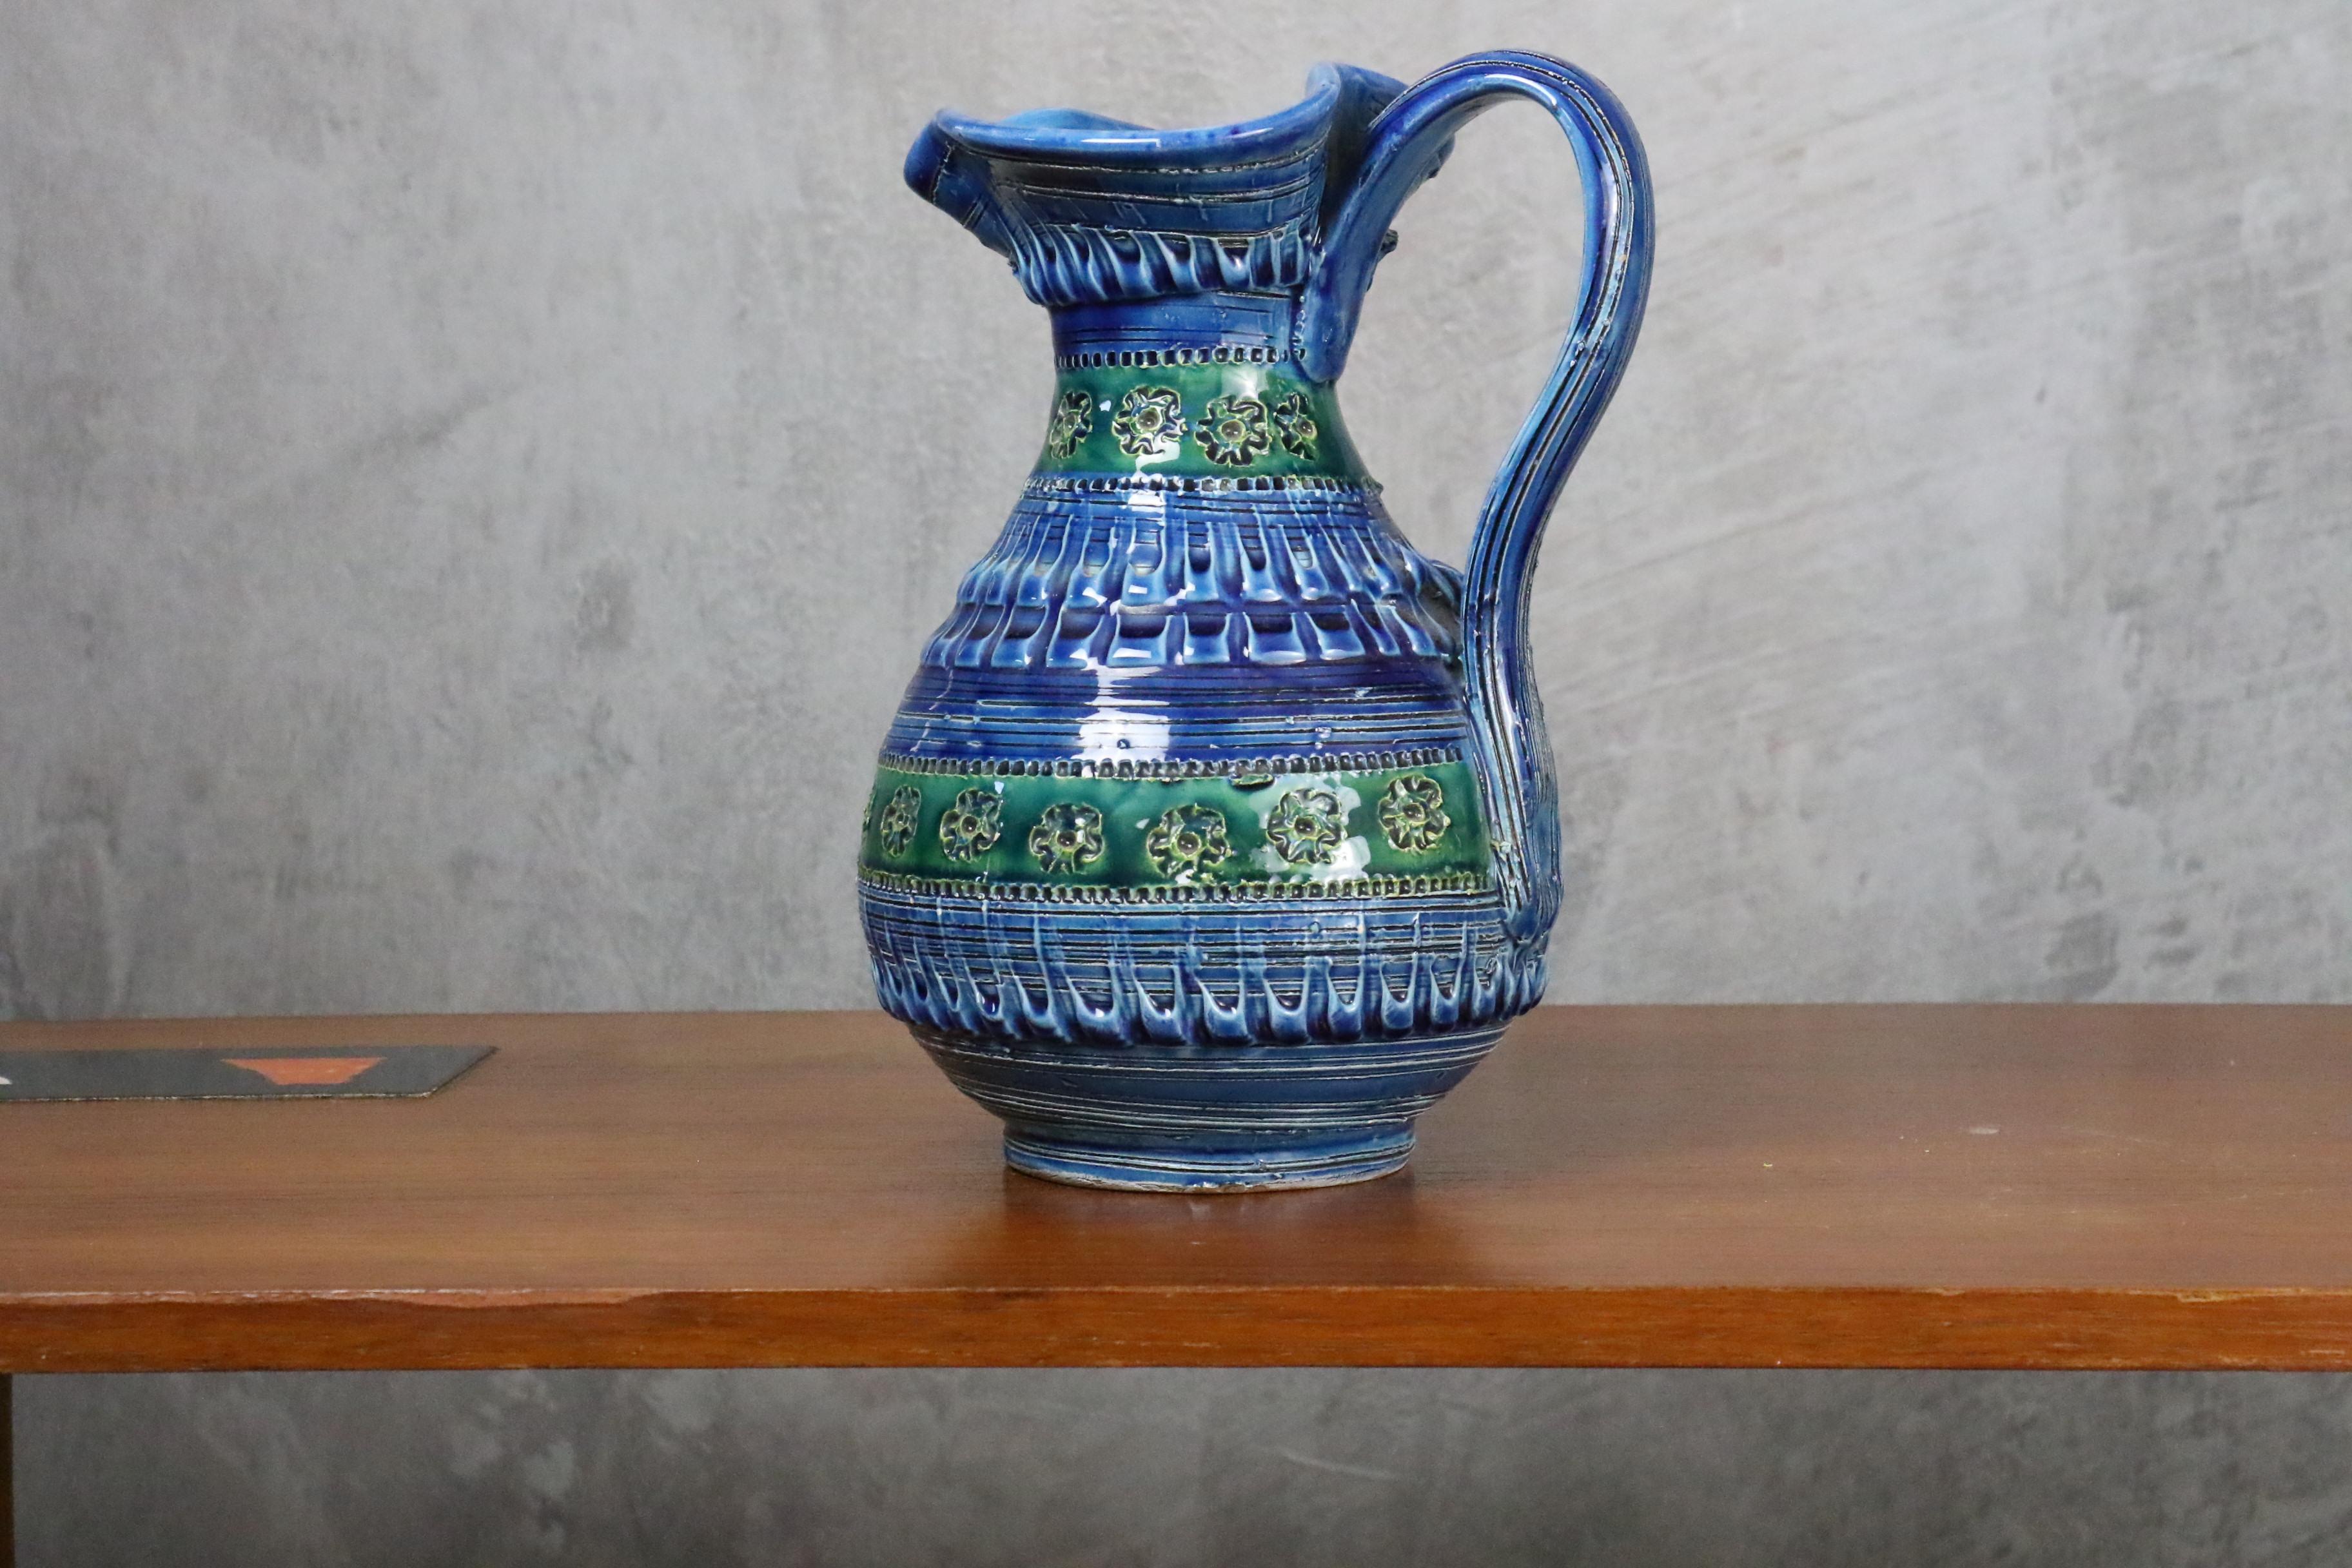 Aldo Londi Terracotta Ceramic Rimini Blue Vase or Pitcher for Bitossi, Italy. 

This magnificent vase was designed by Aldo Londi in Italy during 1960s.

Blue, green and turquoise terracotta ceramic are glazed by hand with a geometric design carved.